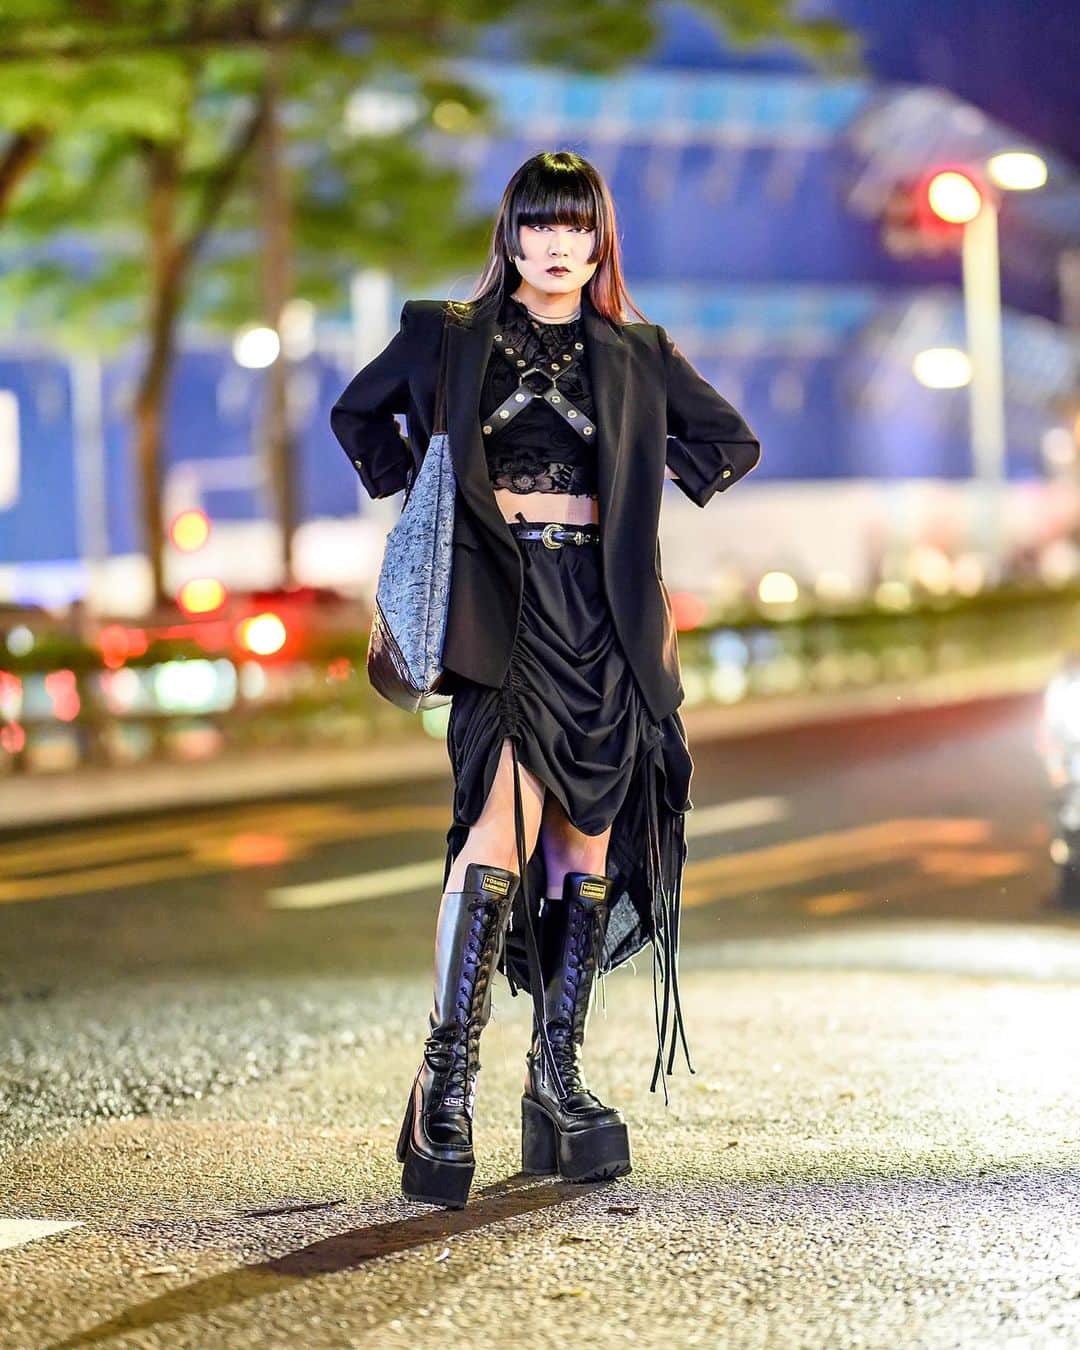 Harajuku Japanのインスタグラム：「Japanese dancer and fetish model Alice (@alice22o_) on the street in Harajuku with a hime hairstyle, striking eye makeup and all black look featuring a harness over a vintage top, a belted strappy Not Conventional skirt, Antiviral accessories, a shoulder bag, and tall Yosuke platform boots. She also told us that Torauma is her favorite musician. Check Alice's personal Instagram for more of her fashion and dance life in Tokyo.」